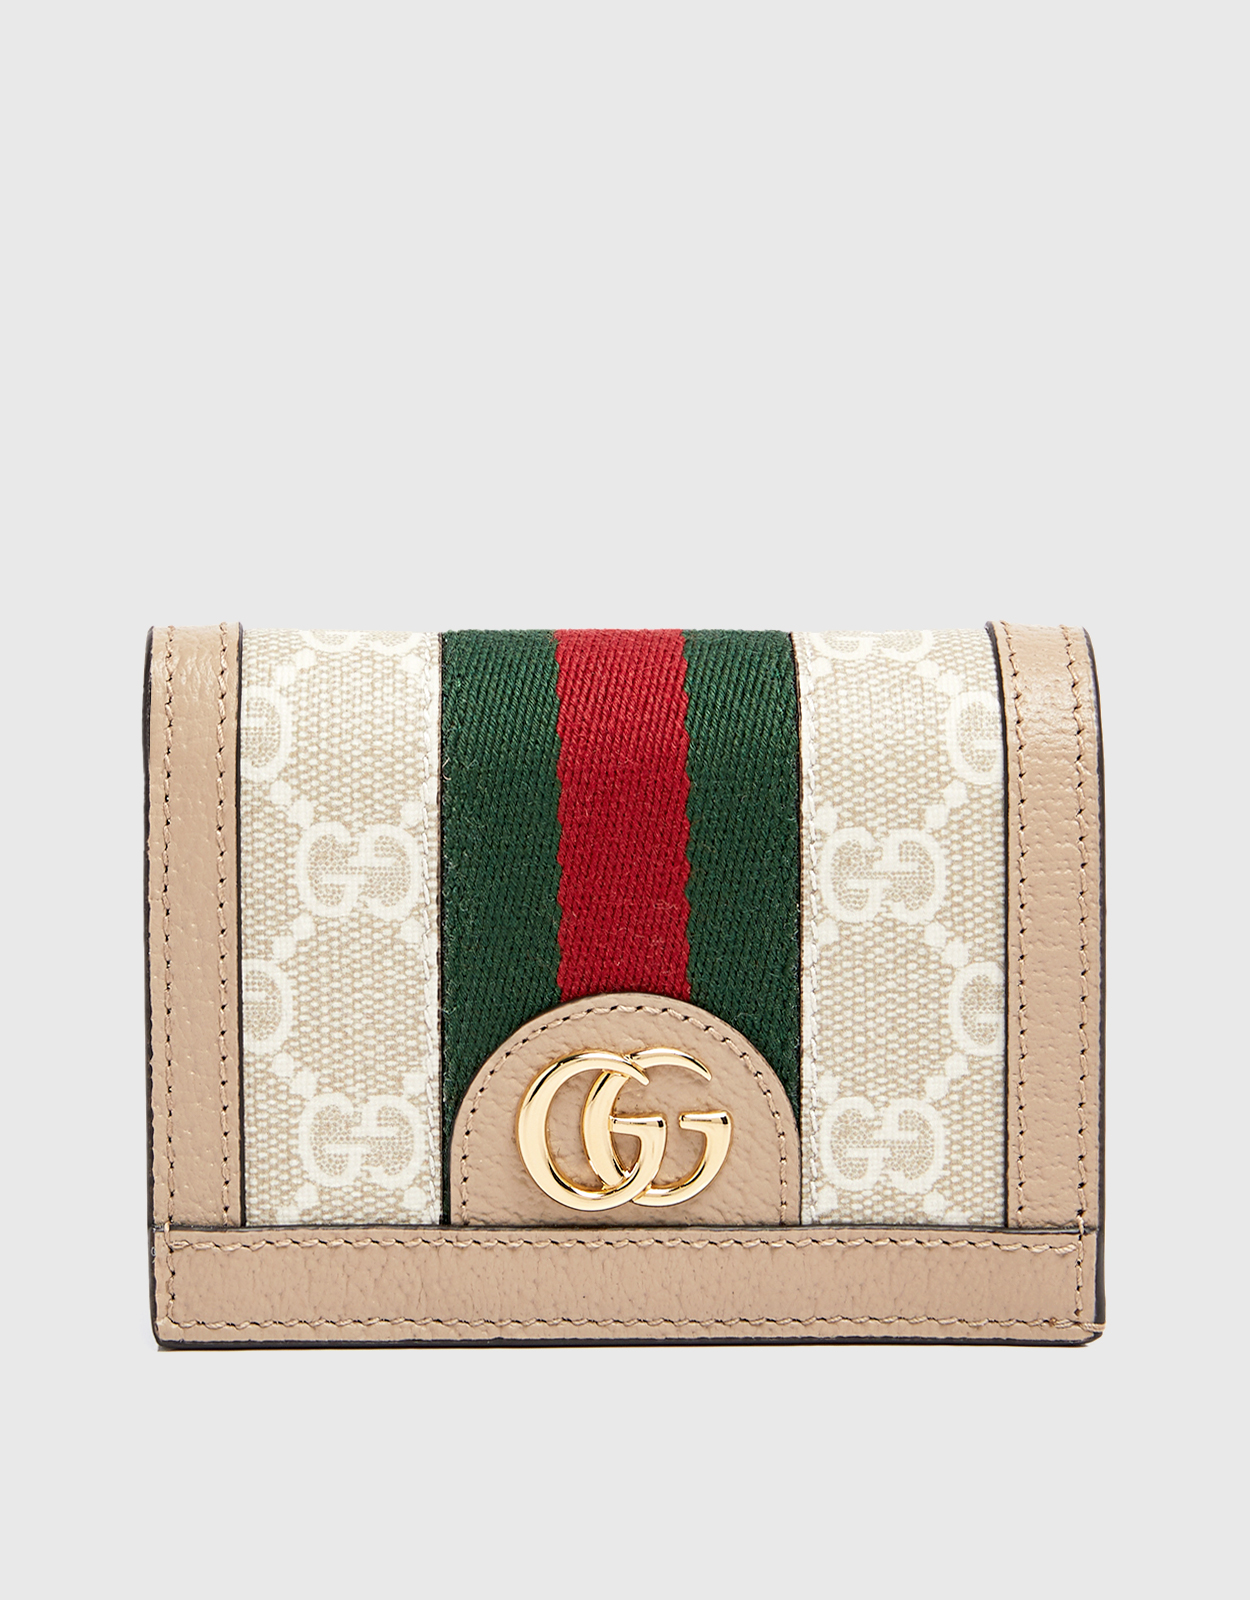 Auth GUCCI Ophidia coin case 644333 beige PVC leather coin purse wallet  [used]